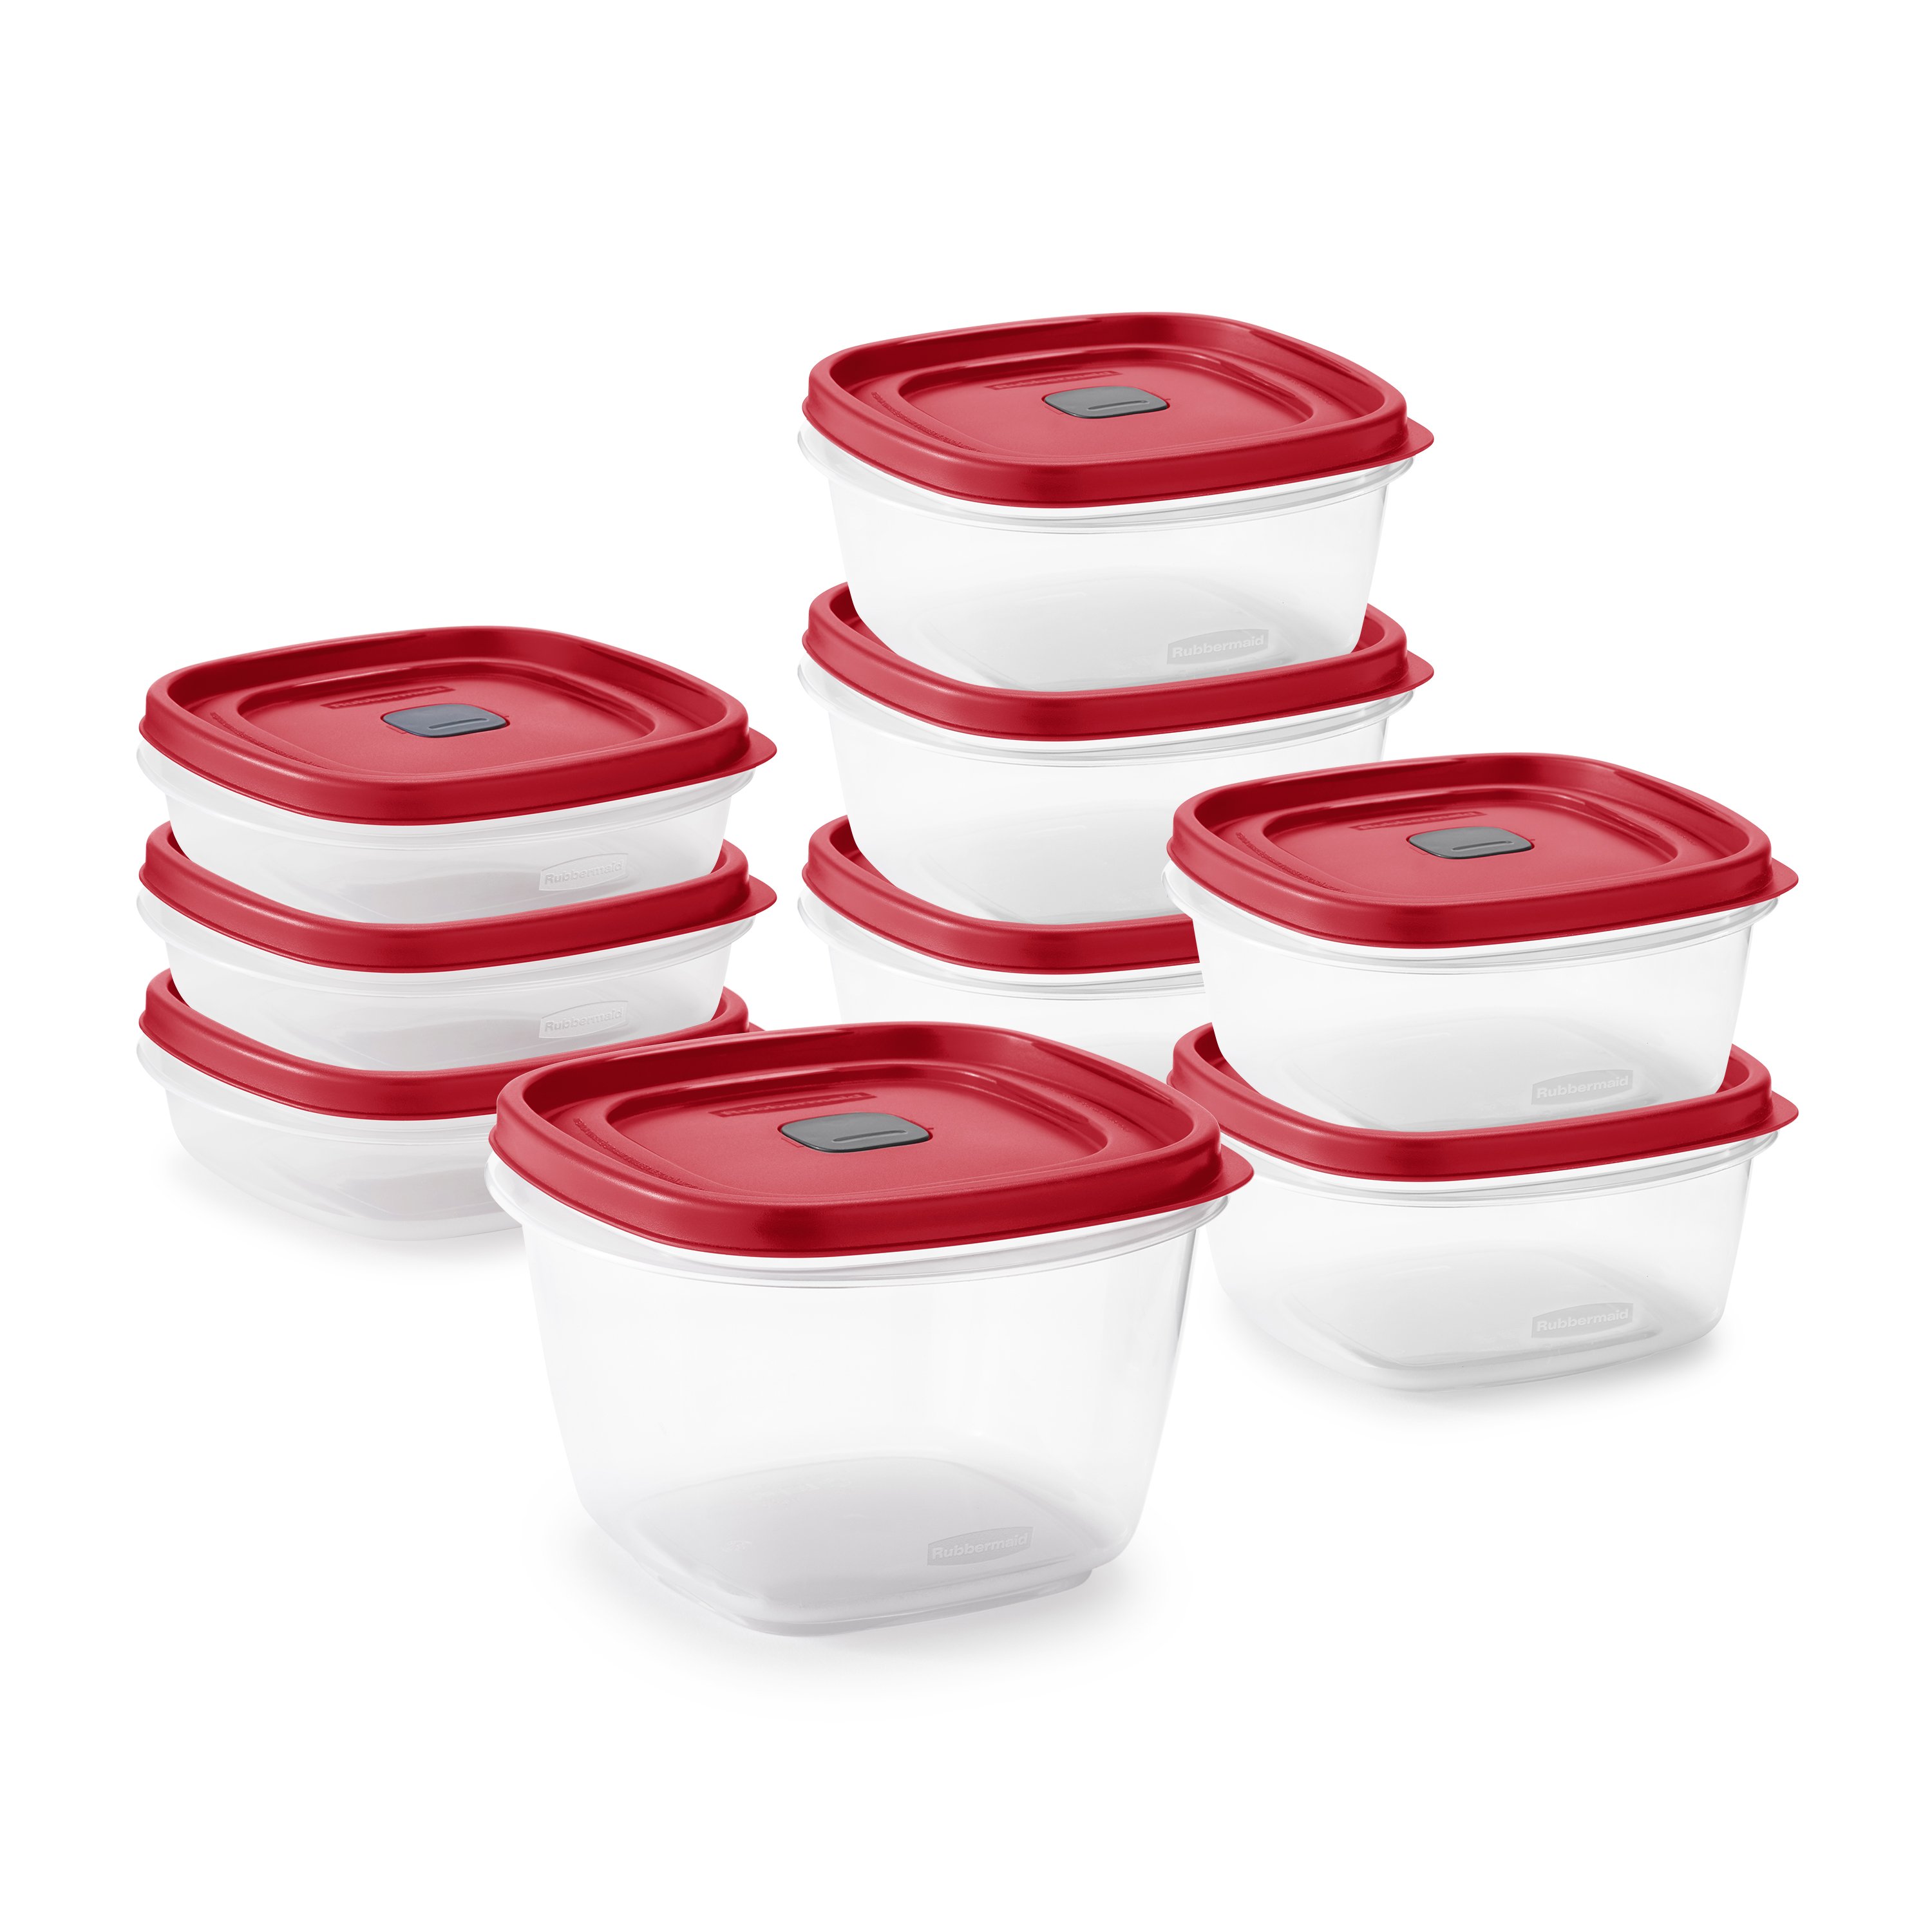 Rubbermaid glass storage set review: Why I love it